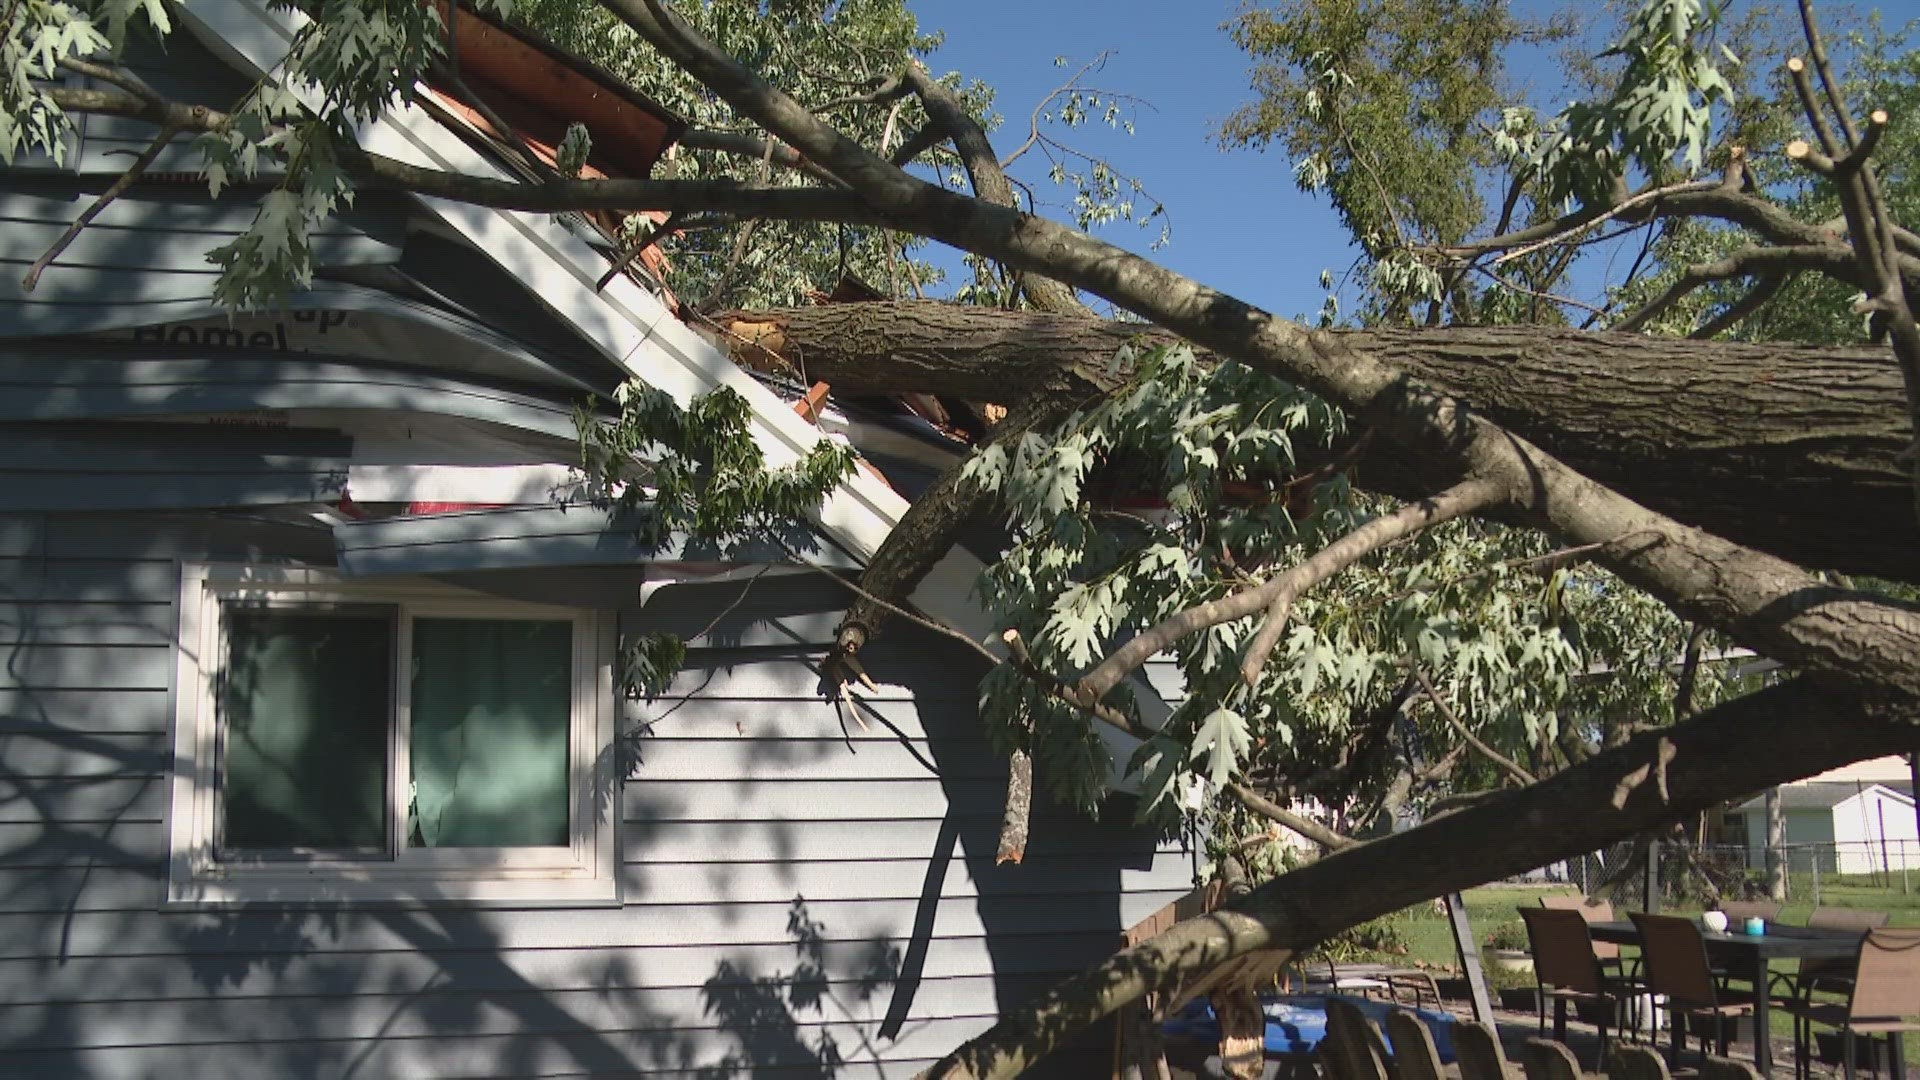 Weekend storms hit the north side of O’Fallon, Missouri, particularly hard. Nathan Koch was watching TV at home when the storm rushed through his neighborhood.